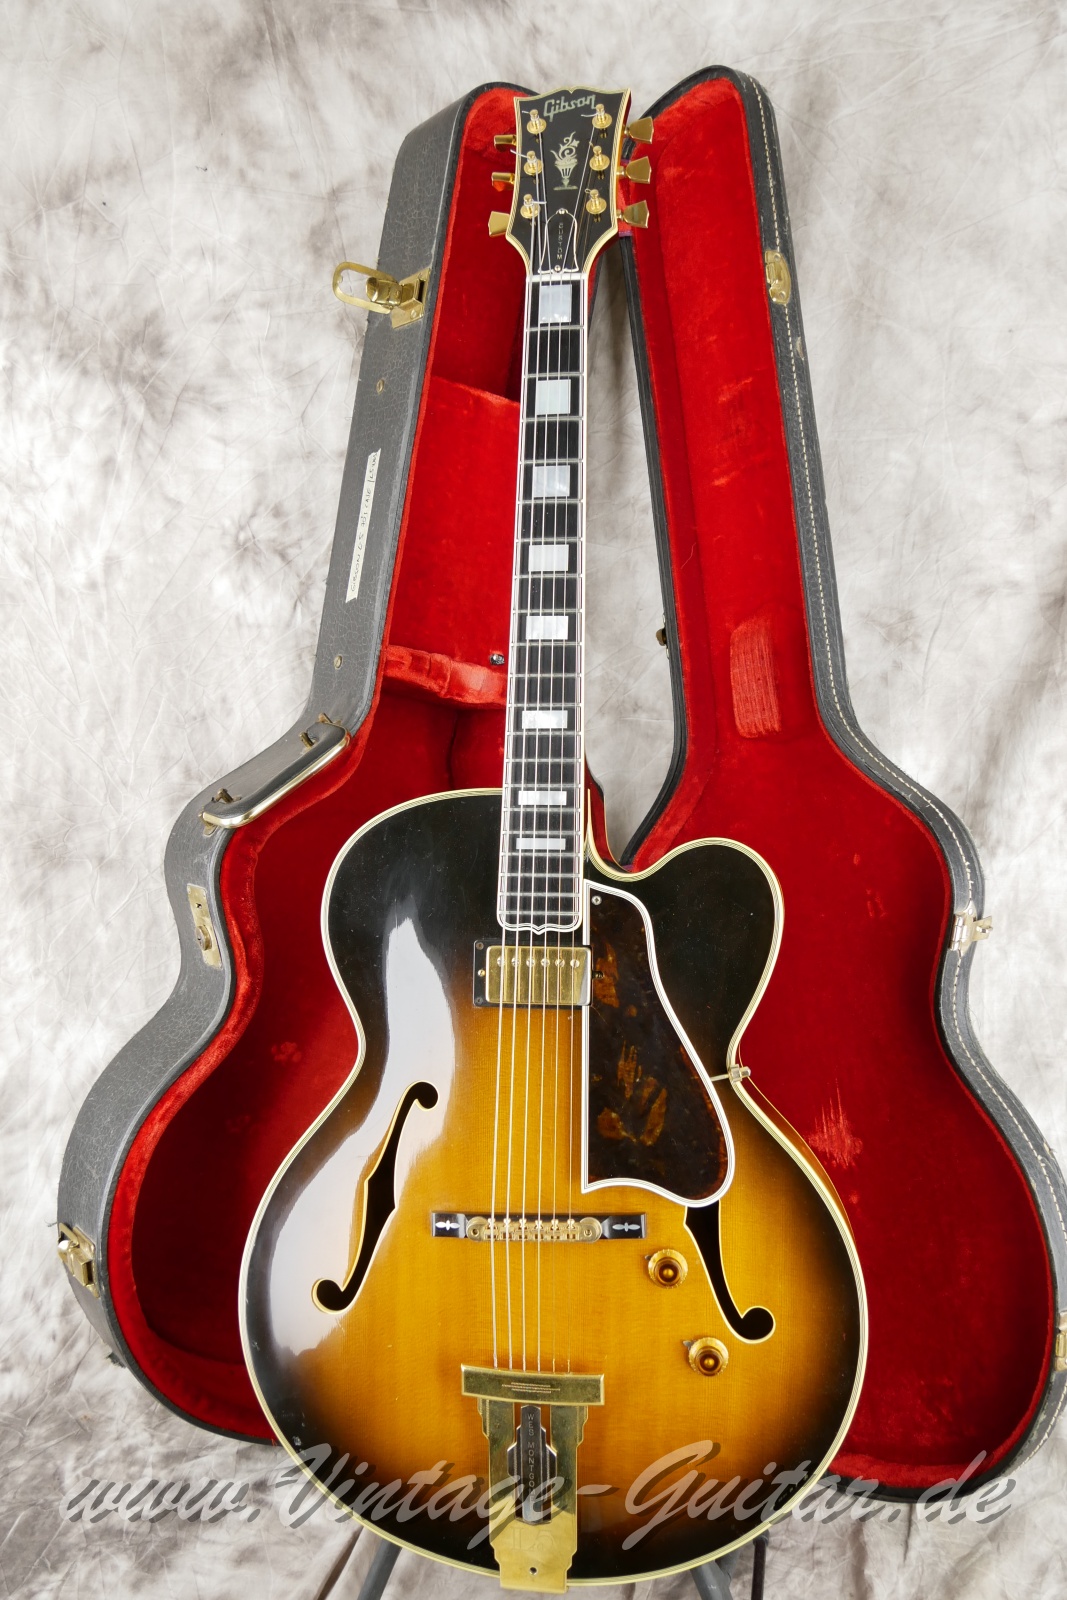 Gibson-L5-Wes-Montgomery-1993-Master-Model-James-Hutchins-023.JPG